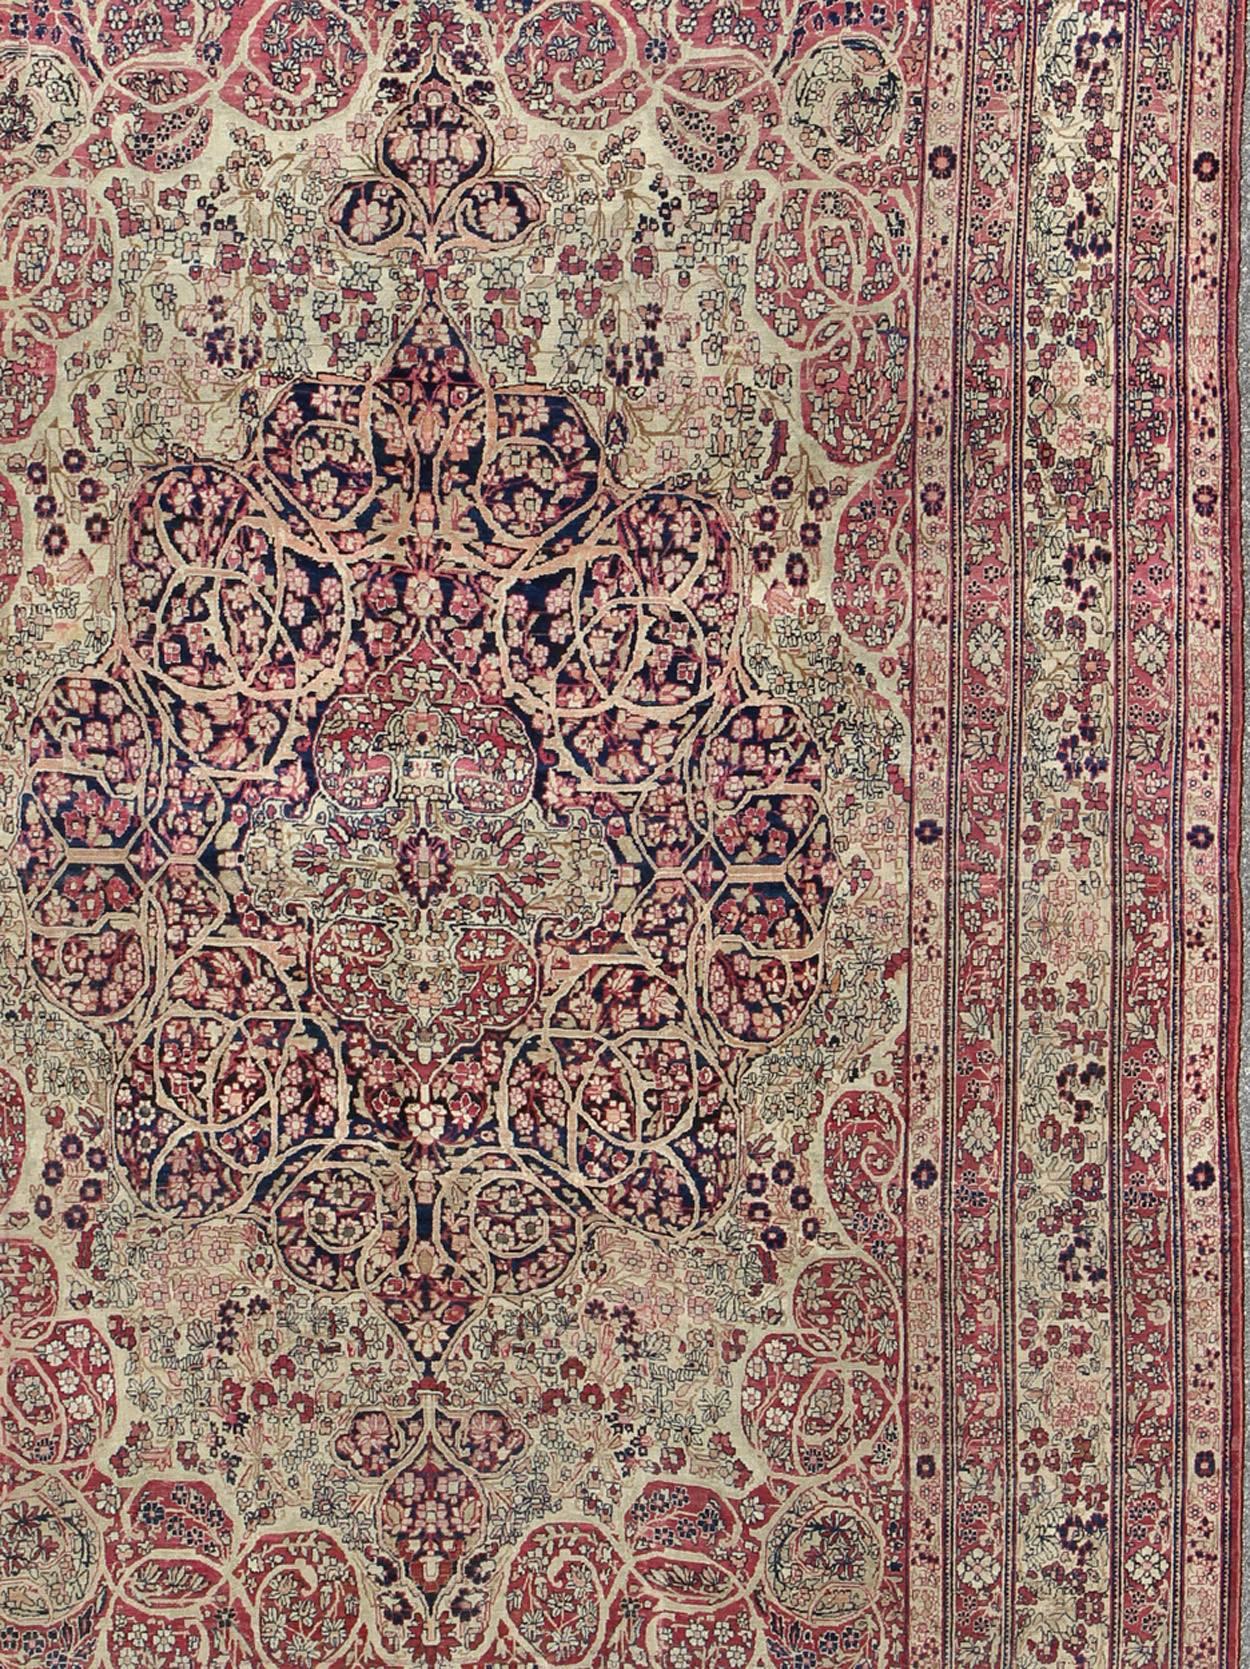 Hand-Knotted Antique Persian Lavar Kerman Rug with Large Medallion and intricate design